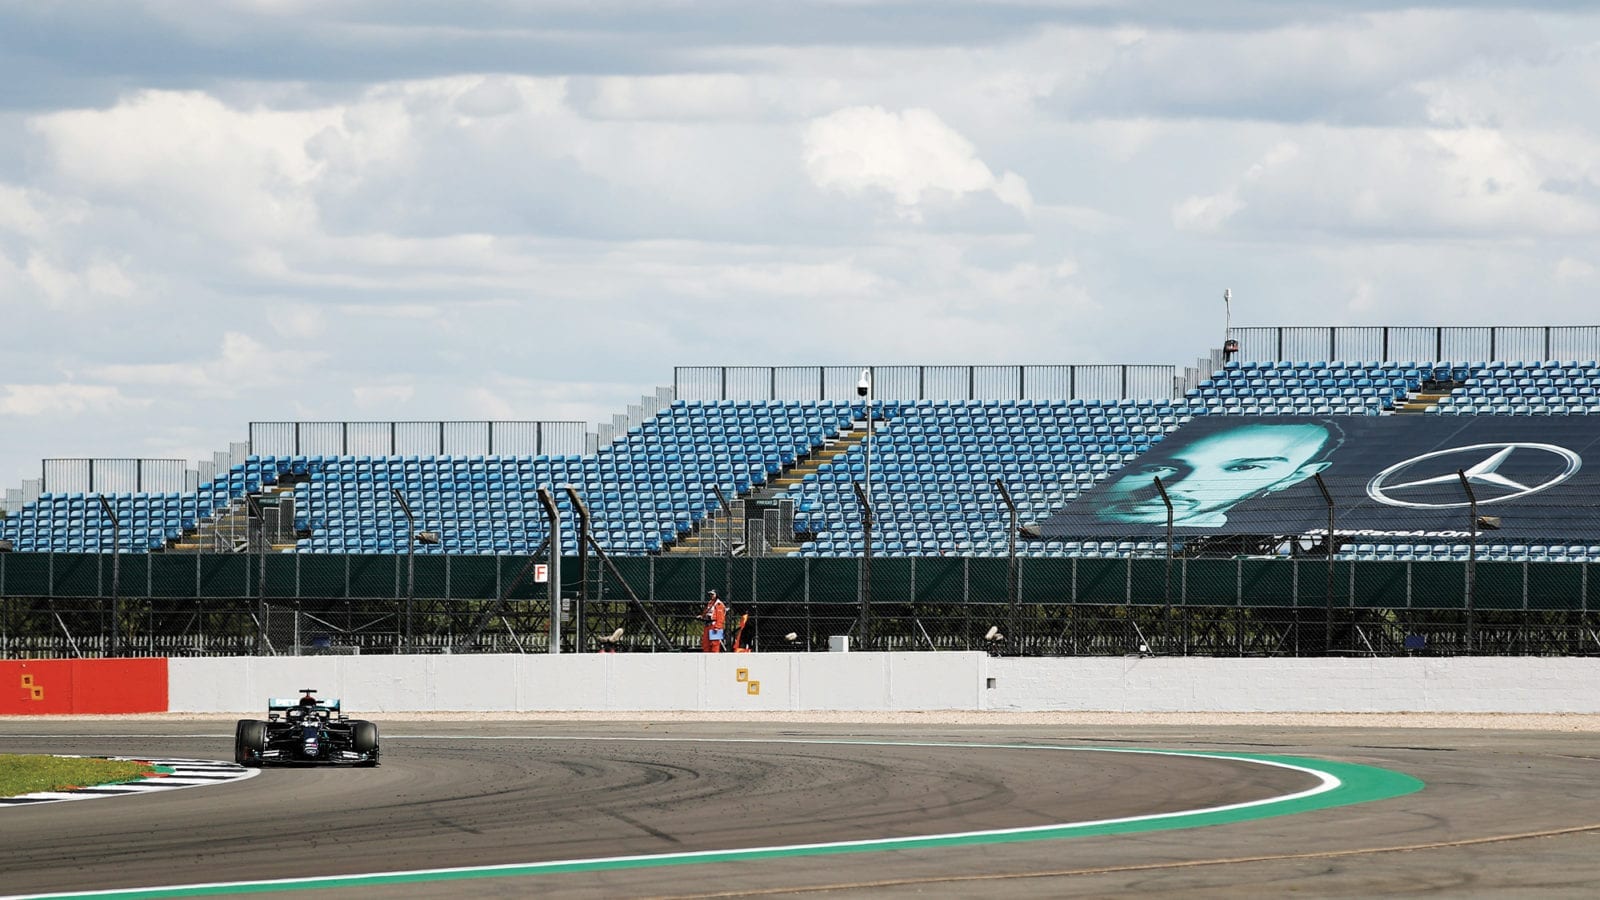 Lewis Hamilton racing in front of empty grandstands at Silverstone in 2020